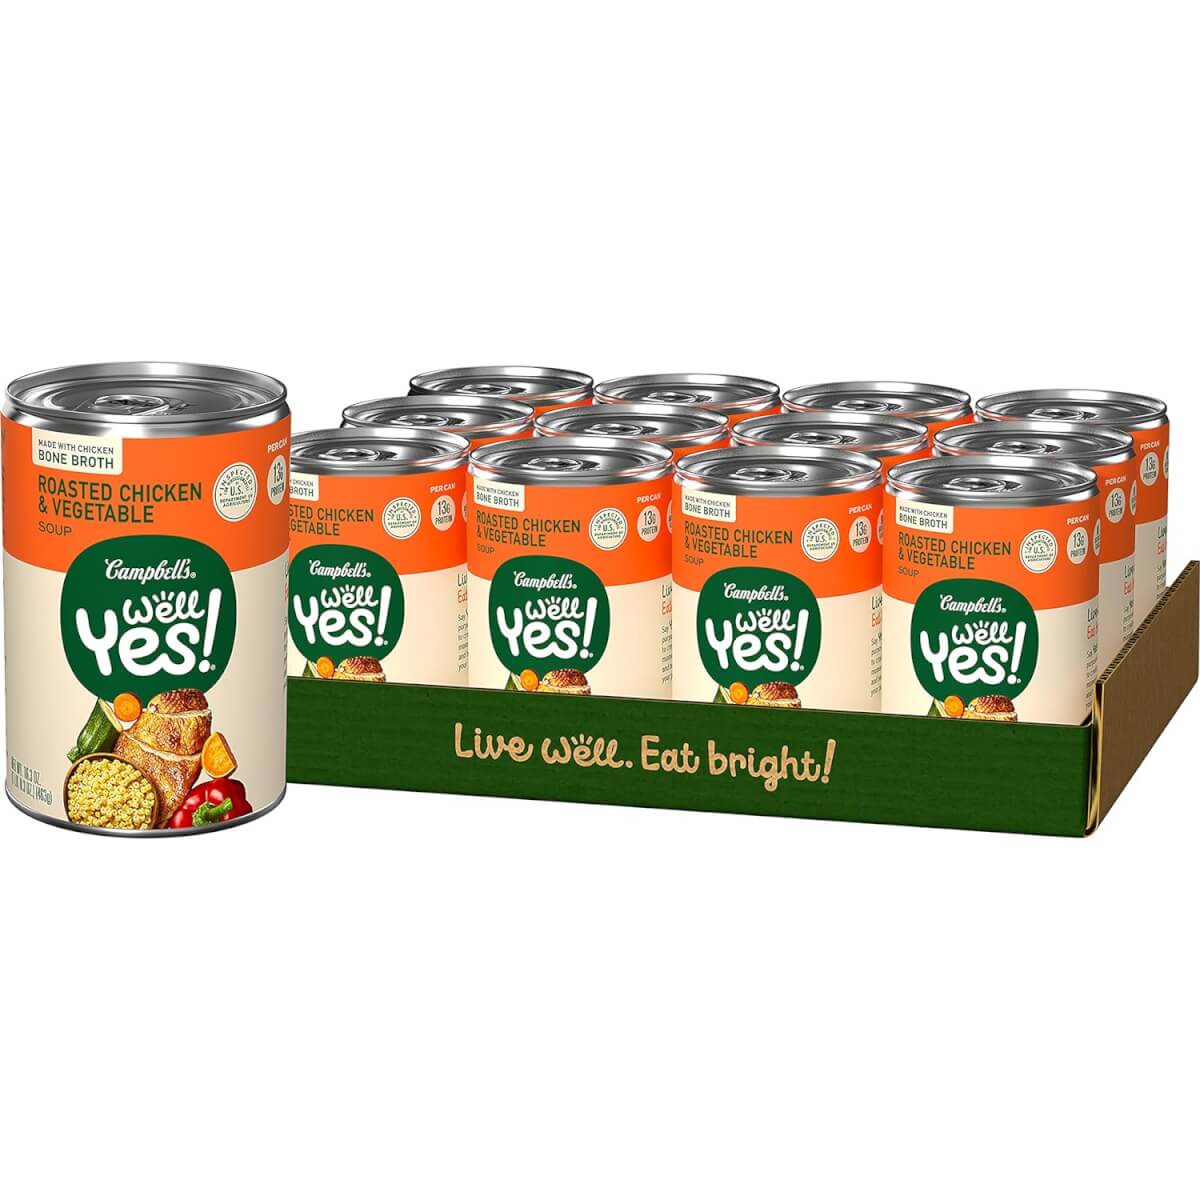 Campbell's Well Yes! The Roasted Chicken & Vegetable soup